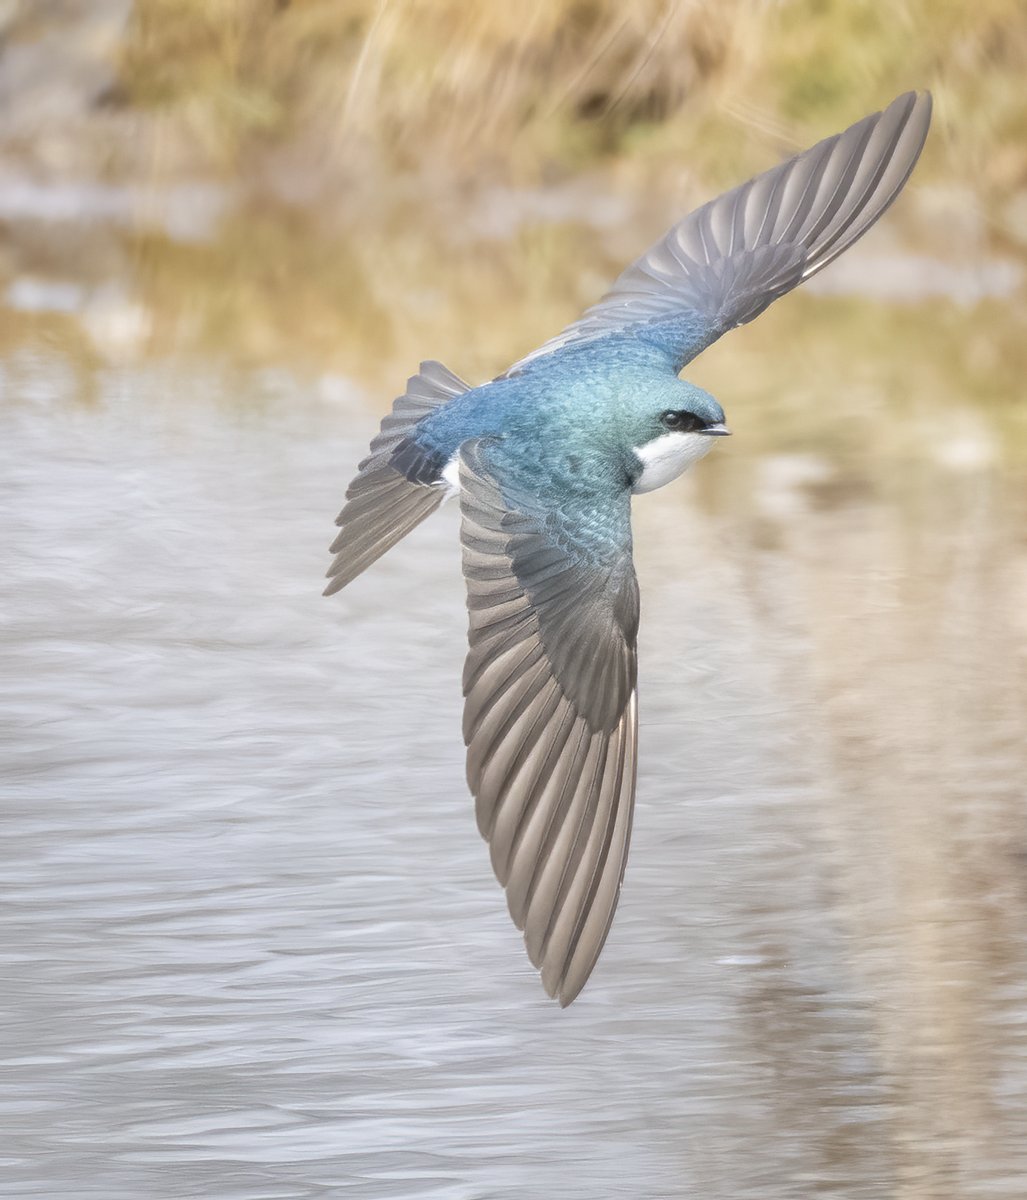 This week's #FridayFlyer is the Tree Swallow!

Have you seen this species before? Share your ID tips in the comments.

📷 Jocelyn Anderson

#TreeSwallow #Swallow #Tachycinetabicolor #MichiganBirding #YoungBirders #MichiganYoungBirders